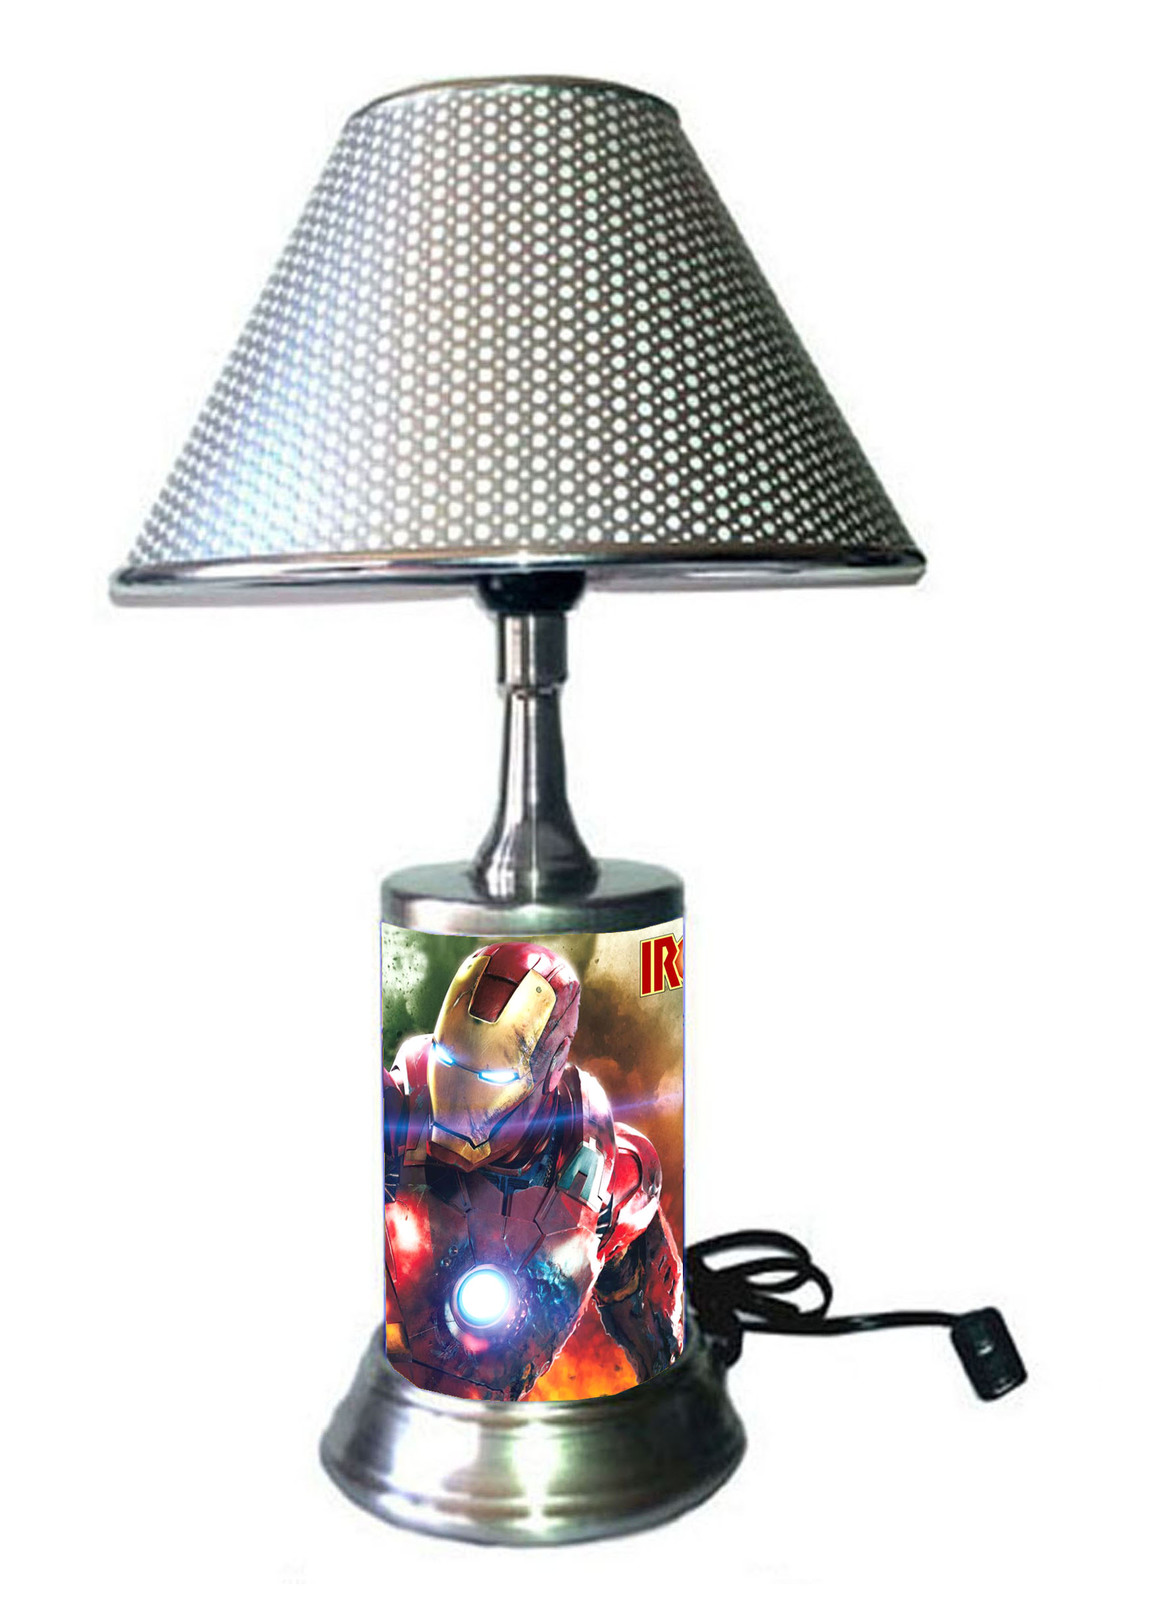 Primary image for Iron Man desk lamp with chrome finish shade